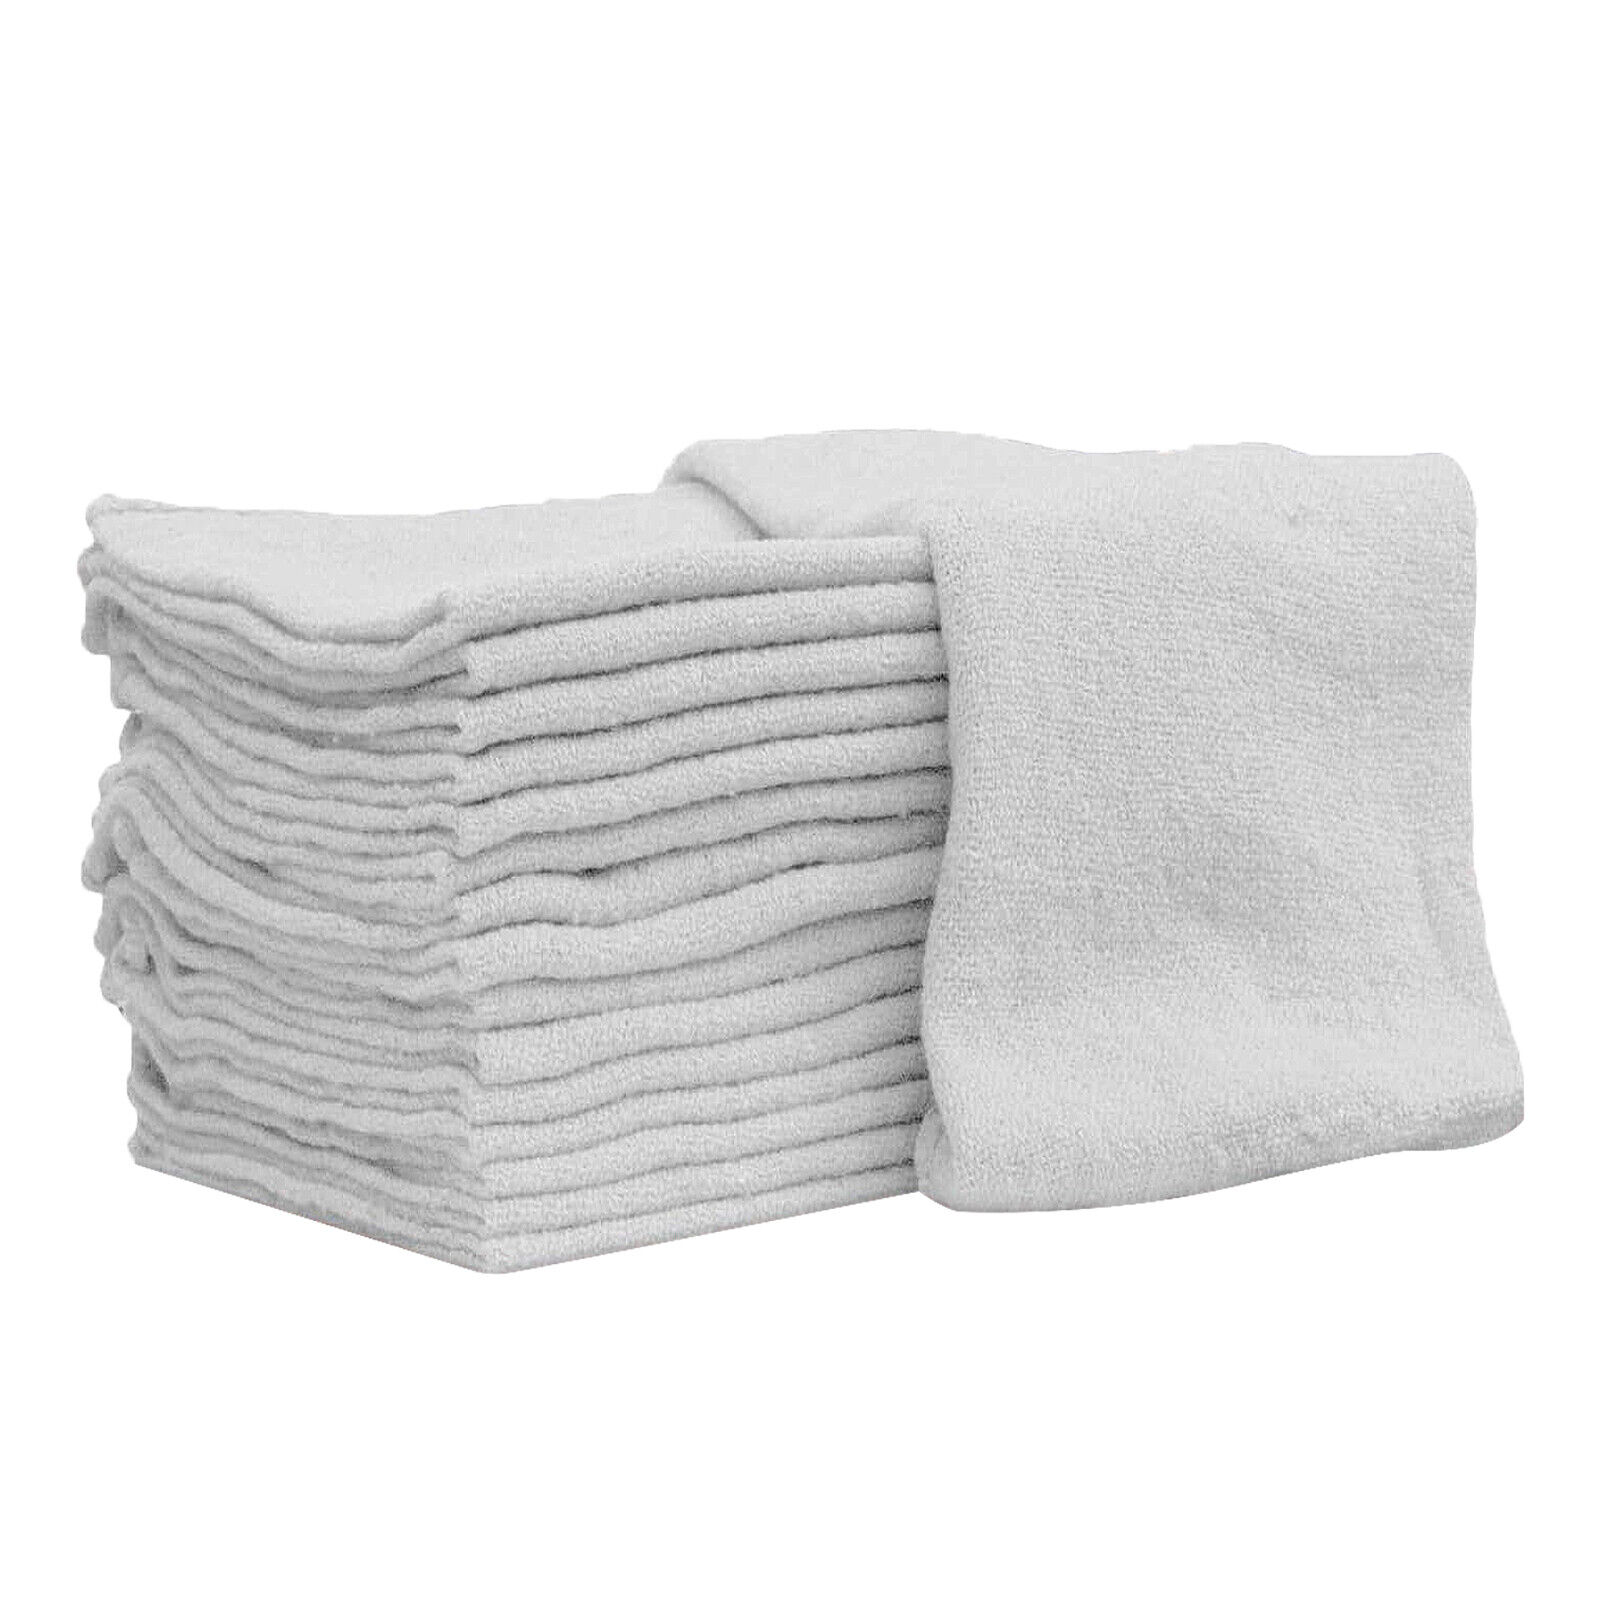 New Industrial A-Grade Shop Towels-Cleaning Towels White - Multipurpose Cleaning